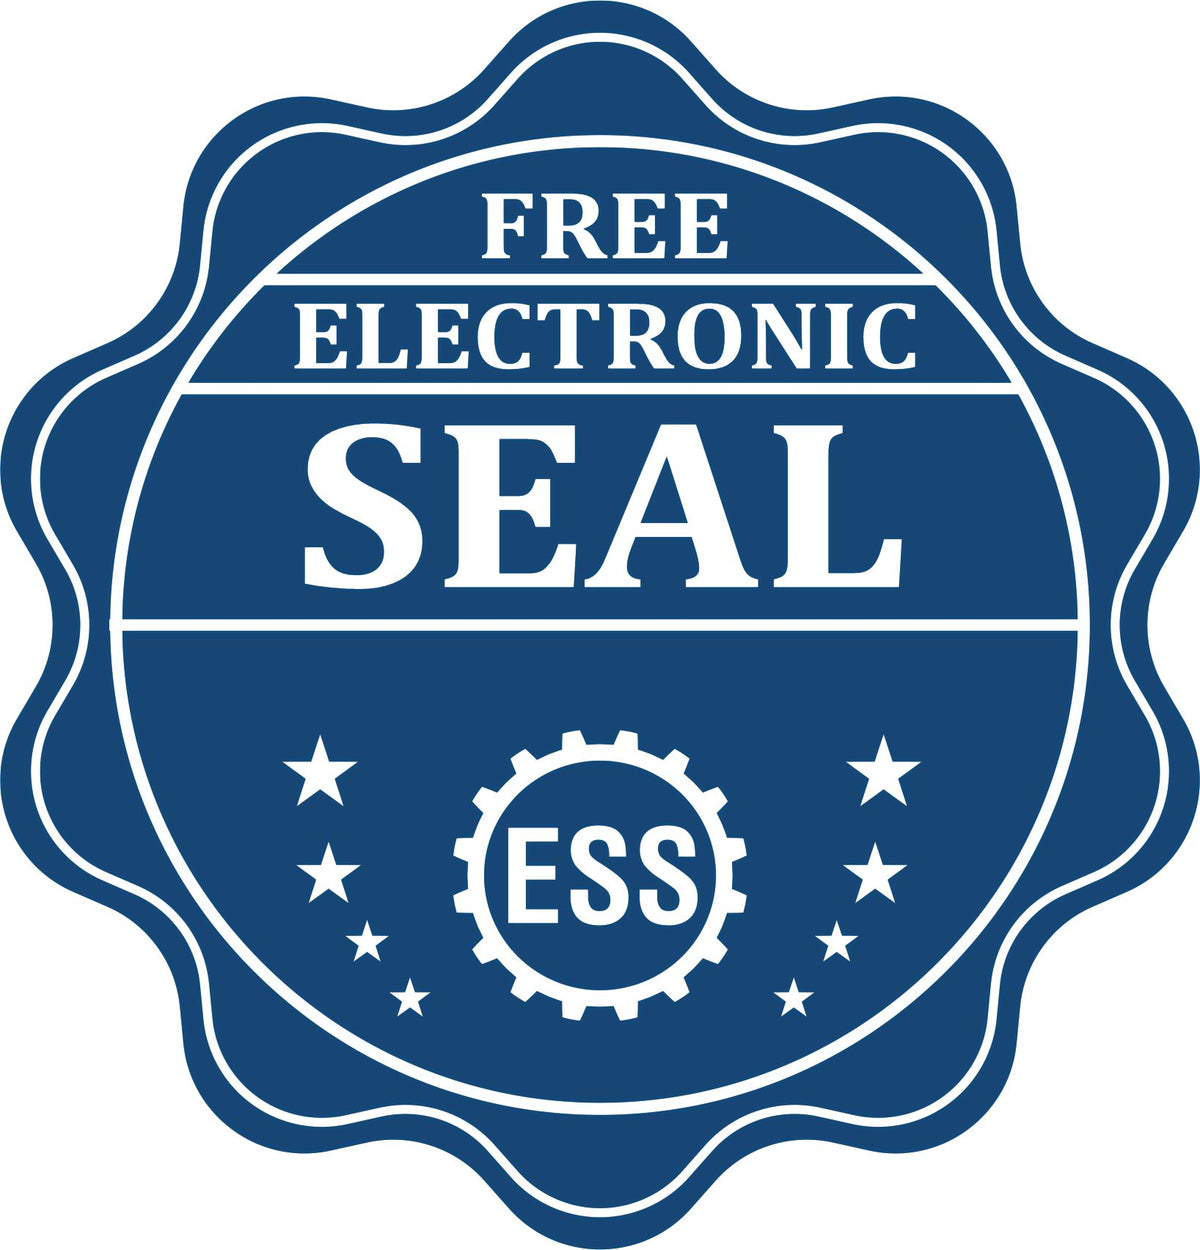 A badge showing a free electronic seal for the Gift North Dakota Land Surveyor Seal with stars and the ESS gear on the emblem.